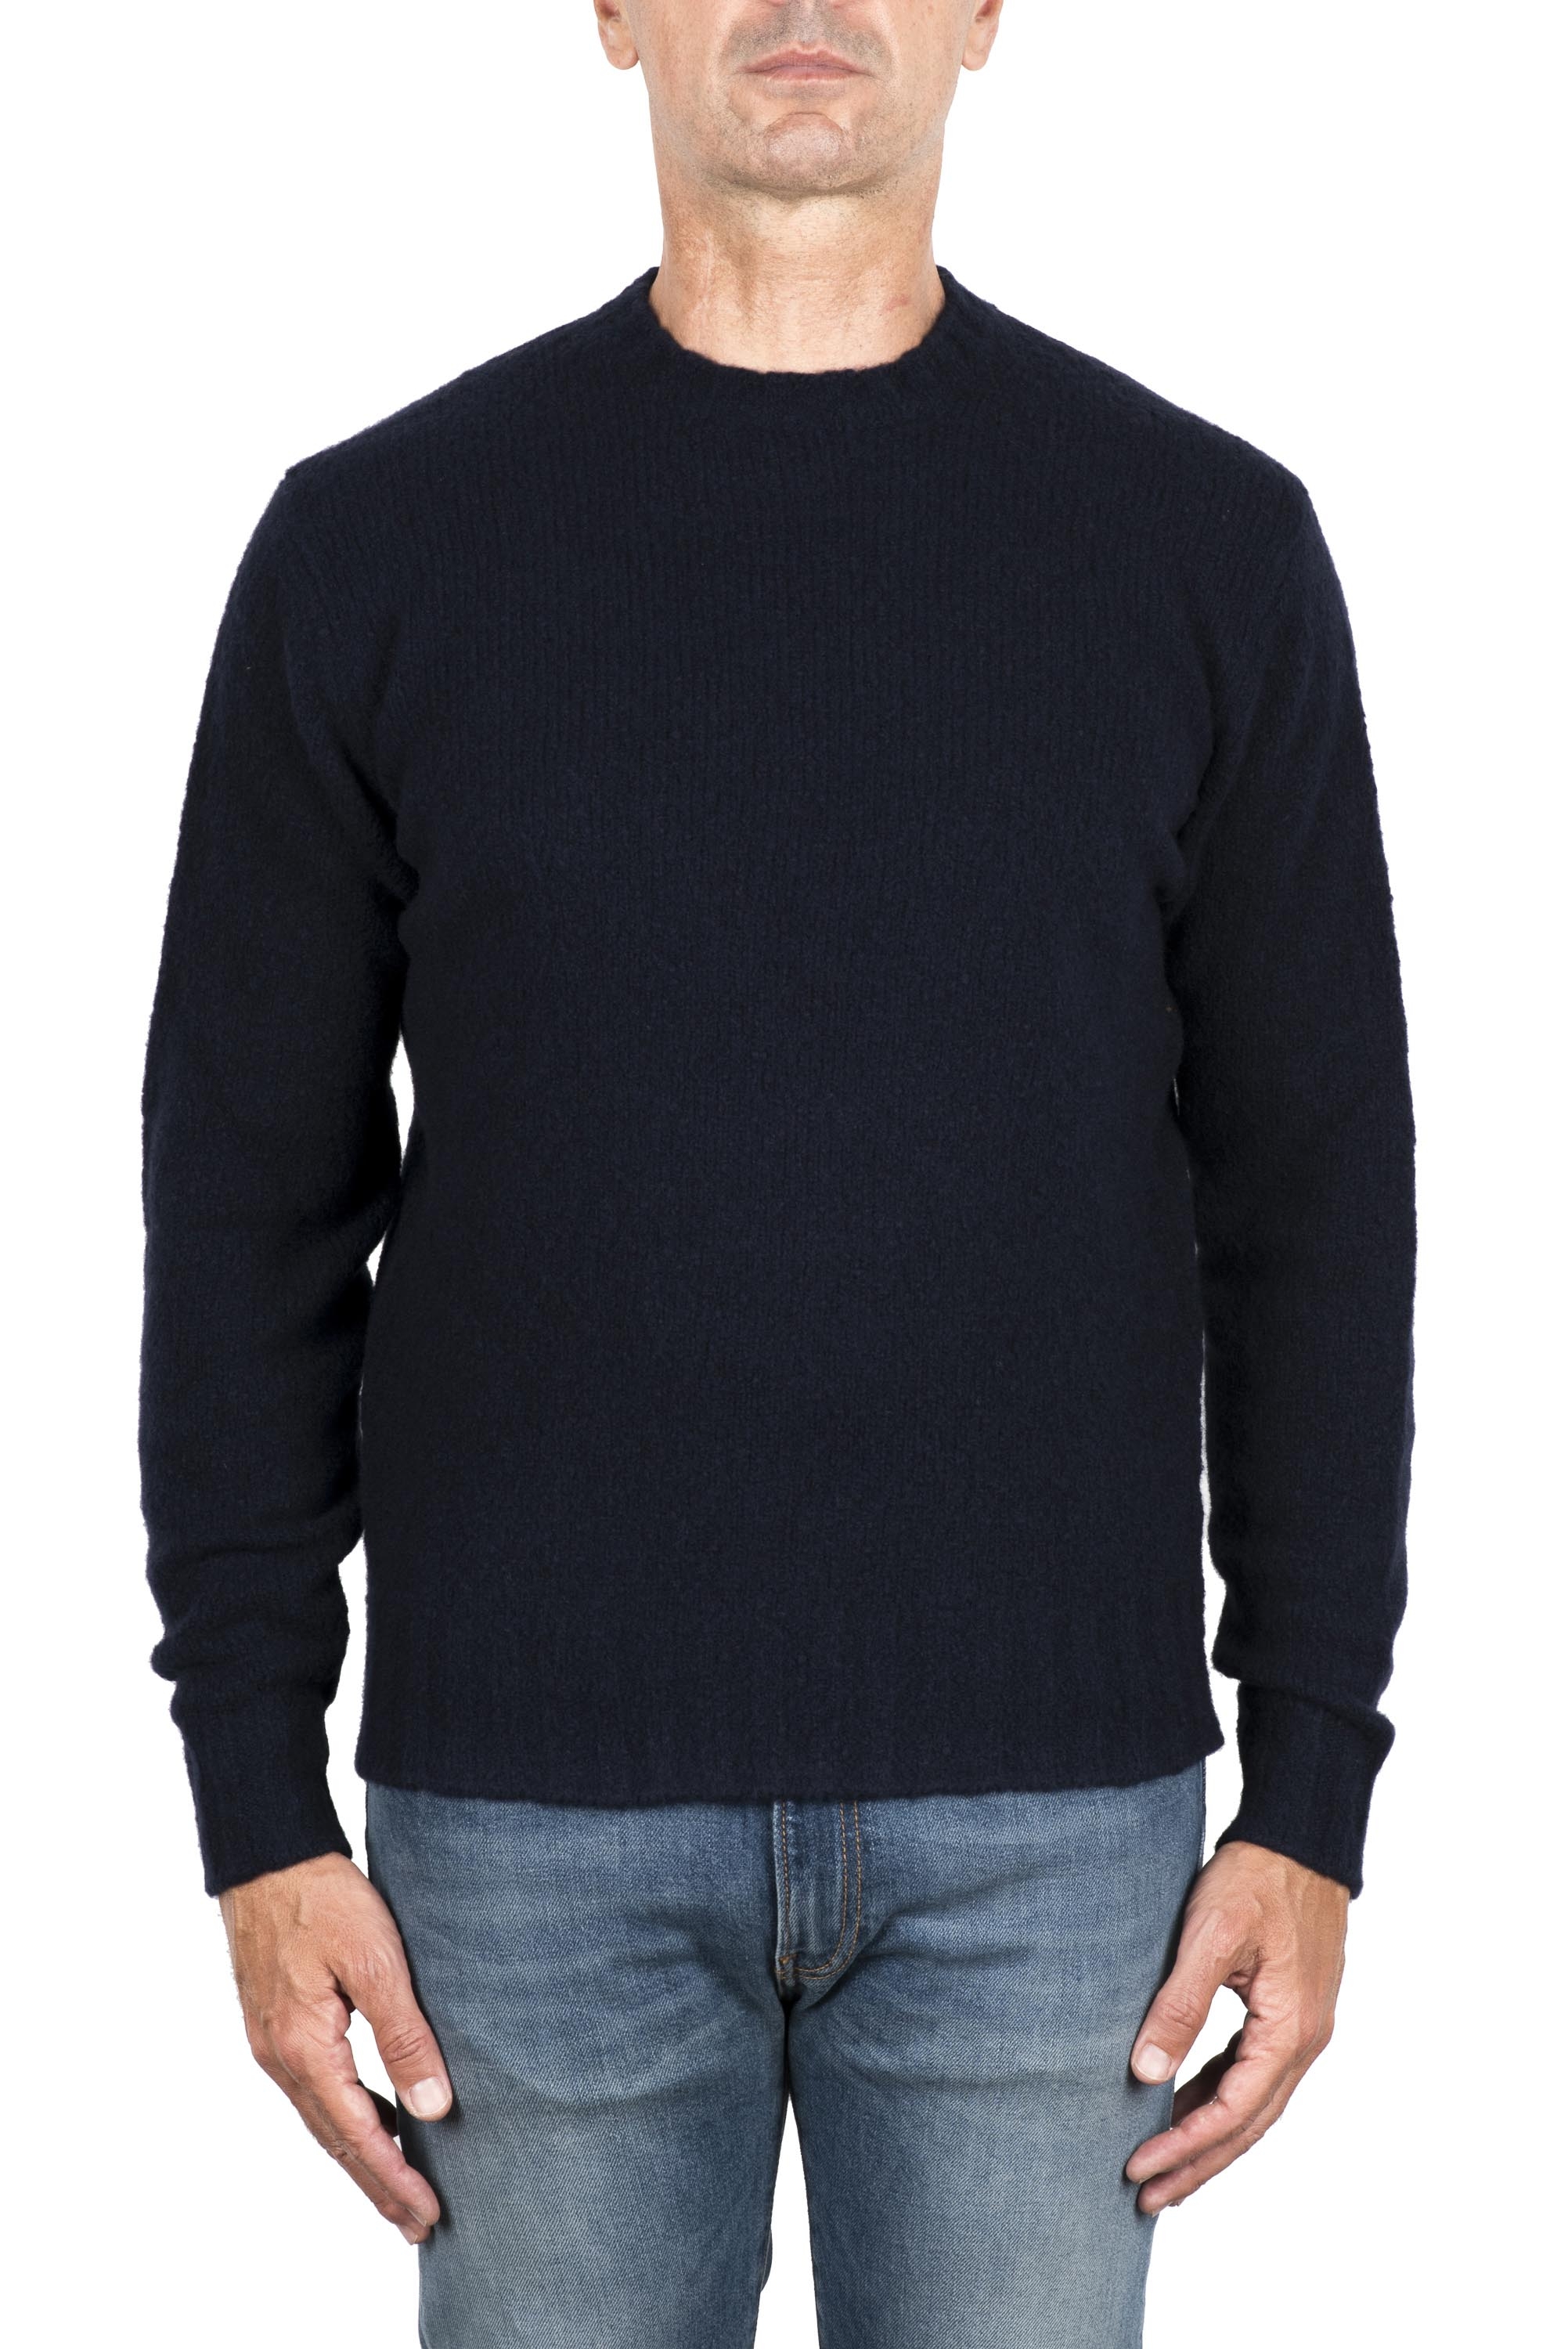 SBU 03503_2021AW Blue cashmere and wool blend crew neck sweater 01